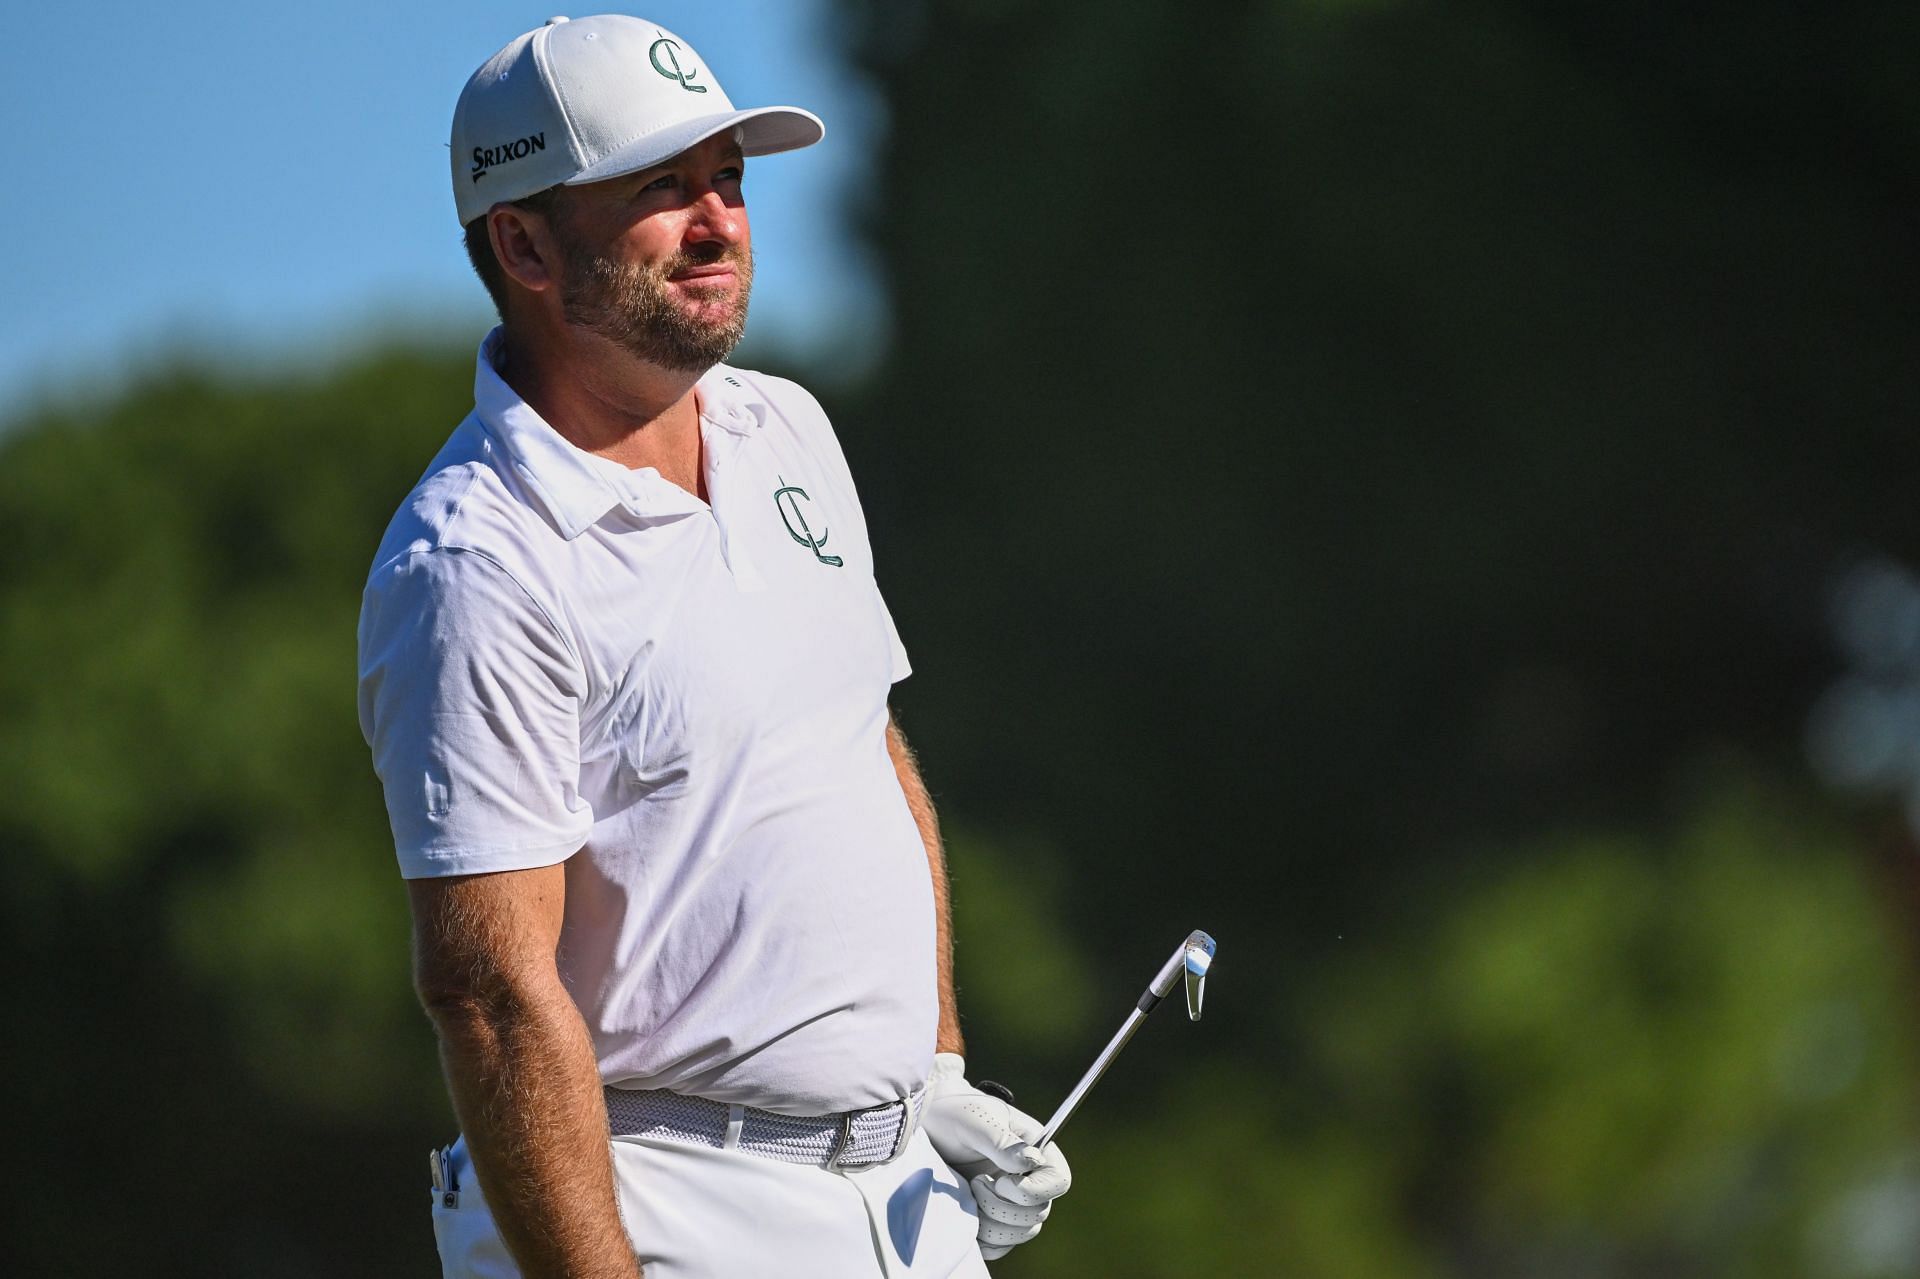 Graeme McDowell is unhappy with LIV majors qualifications